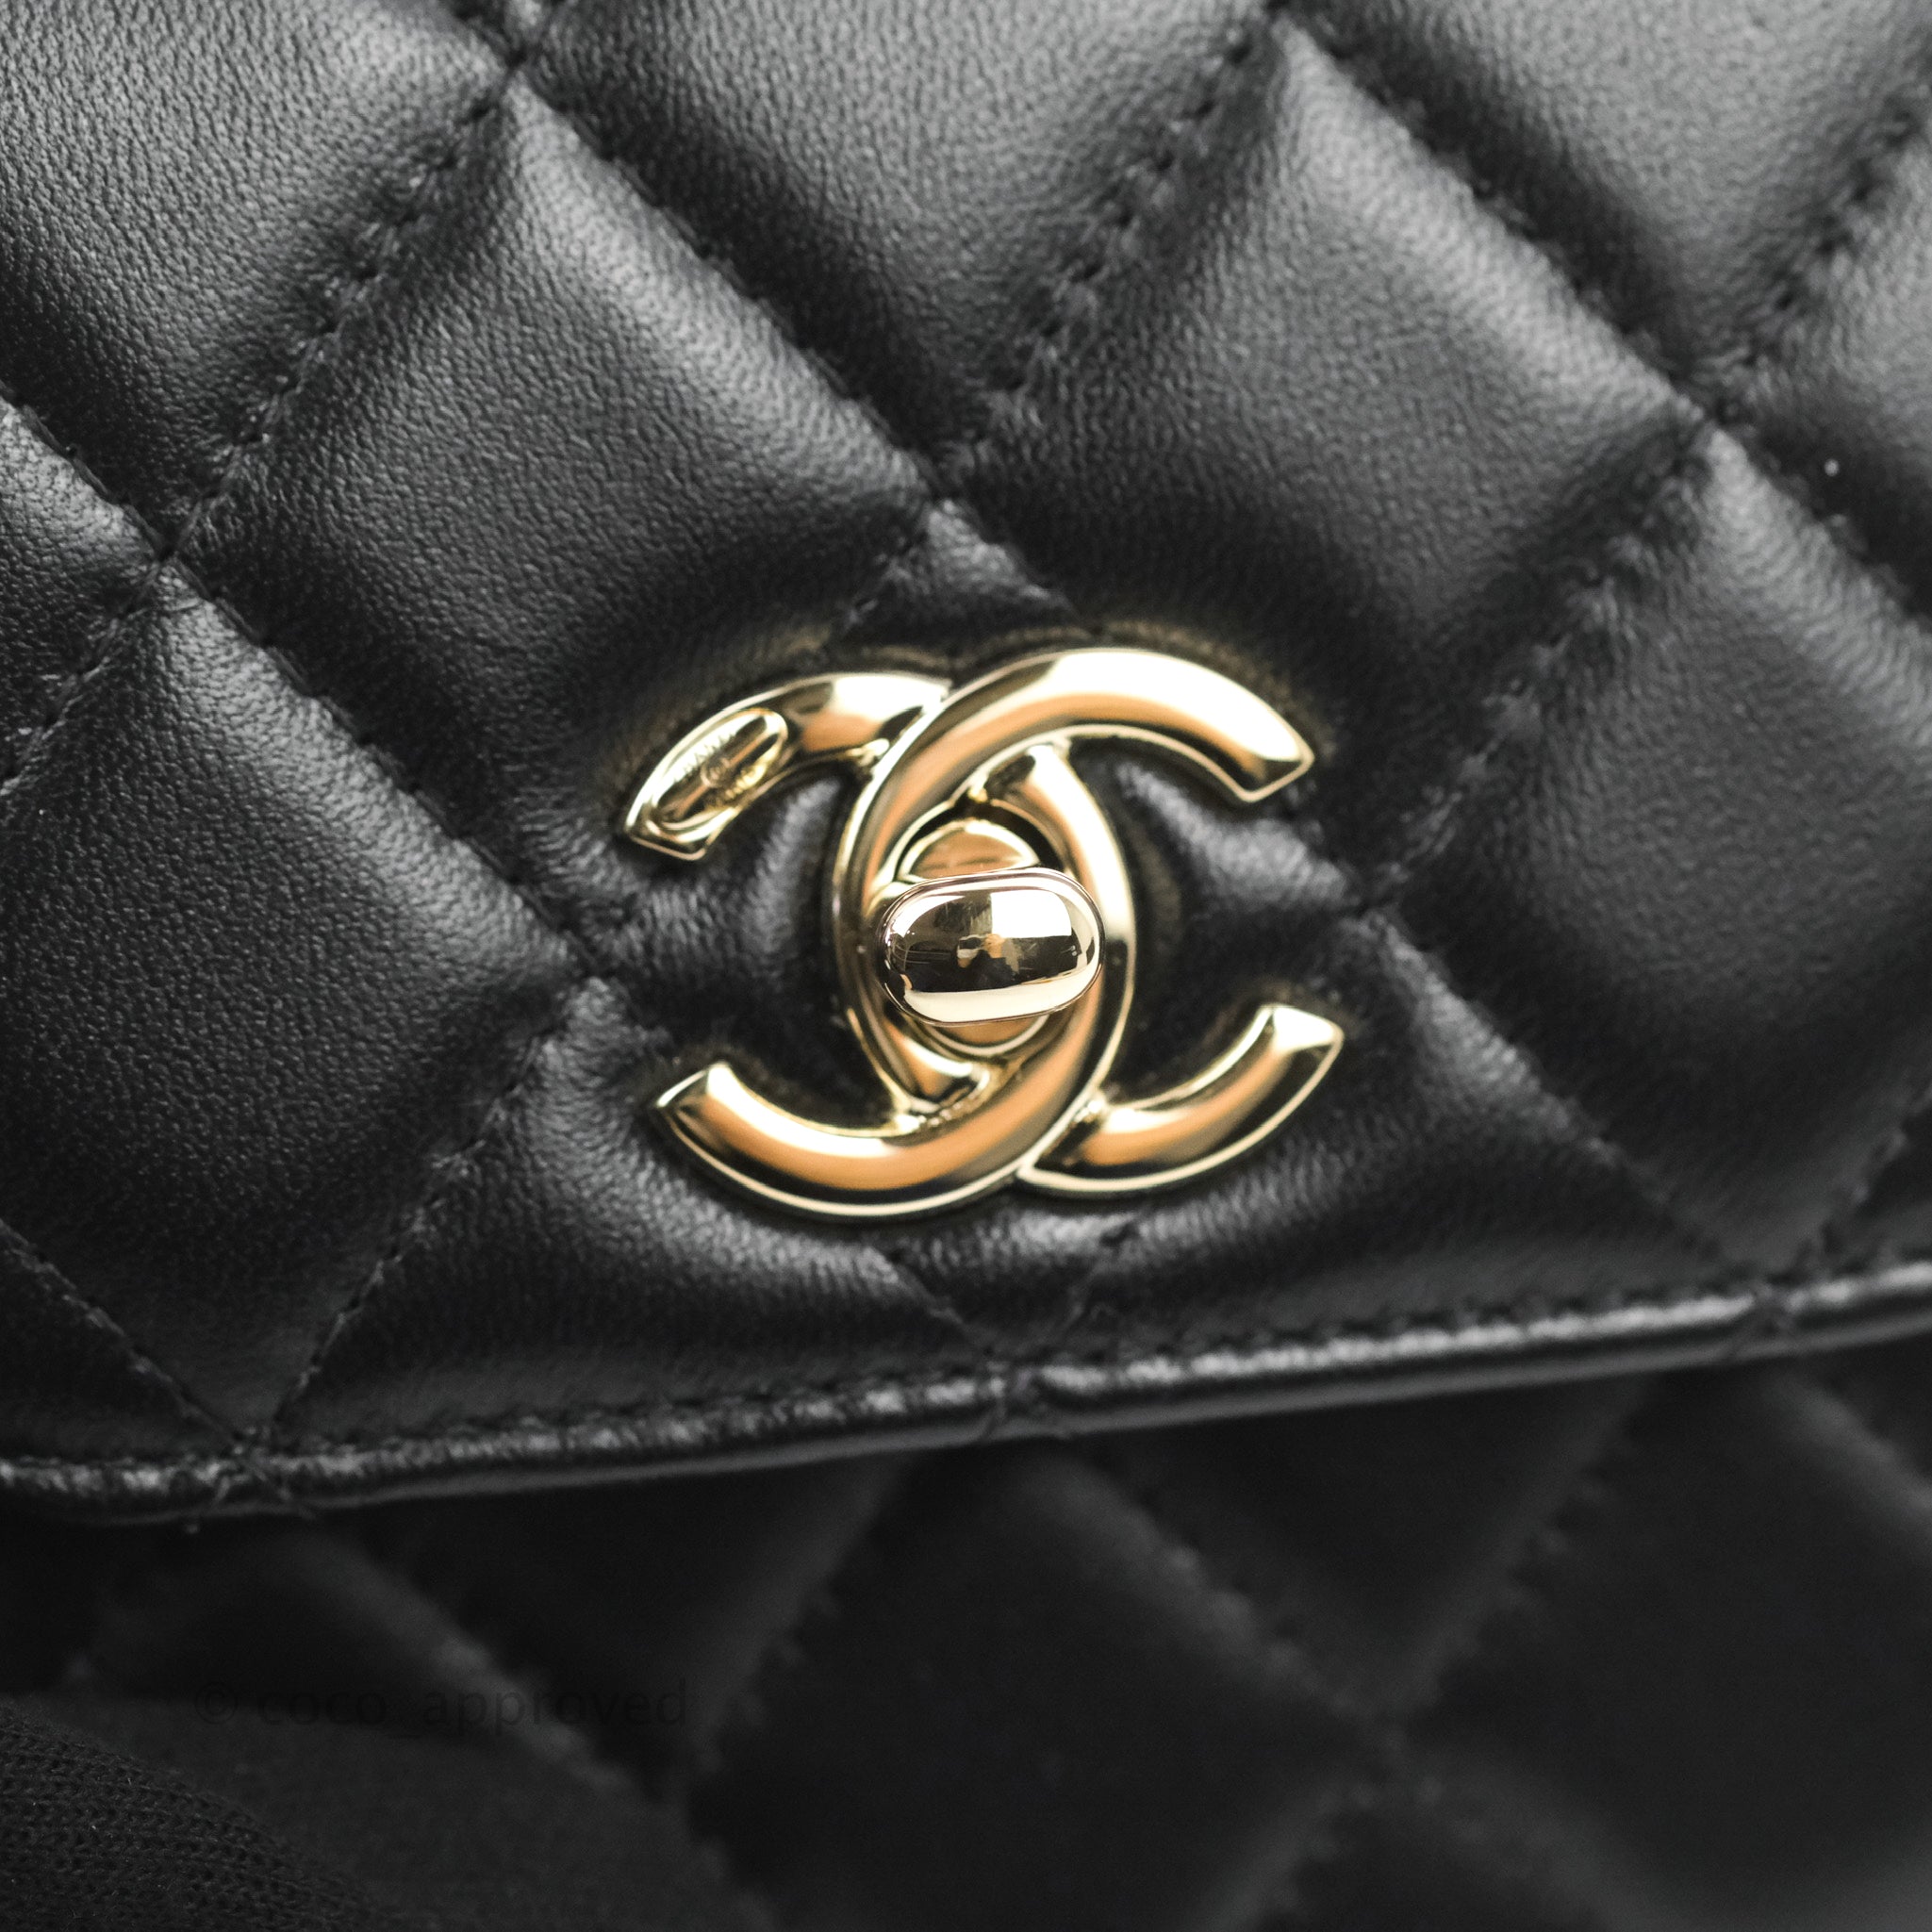 Chanel Lambskin Quilted Small Trendy CC Flap Bag Black Gold